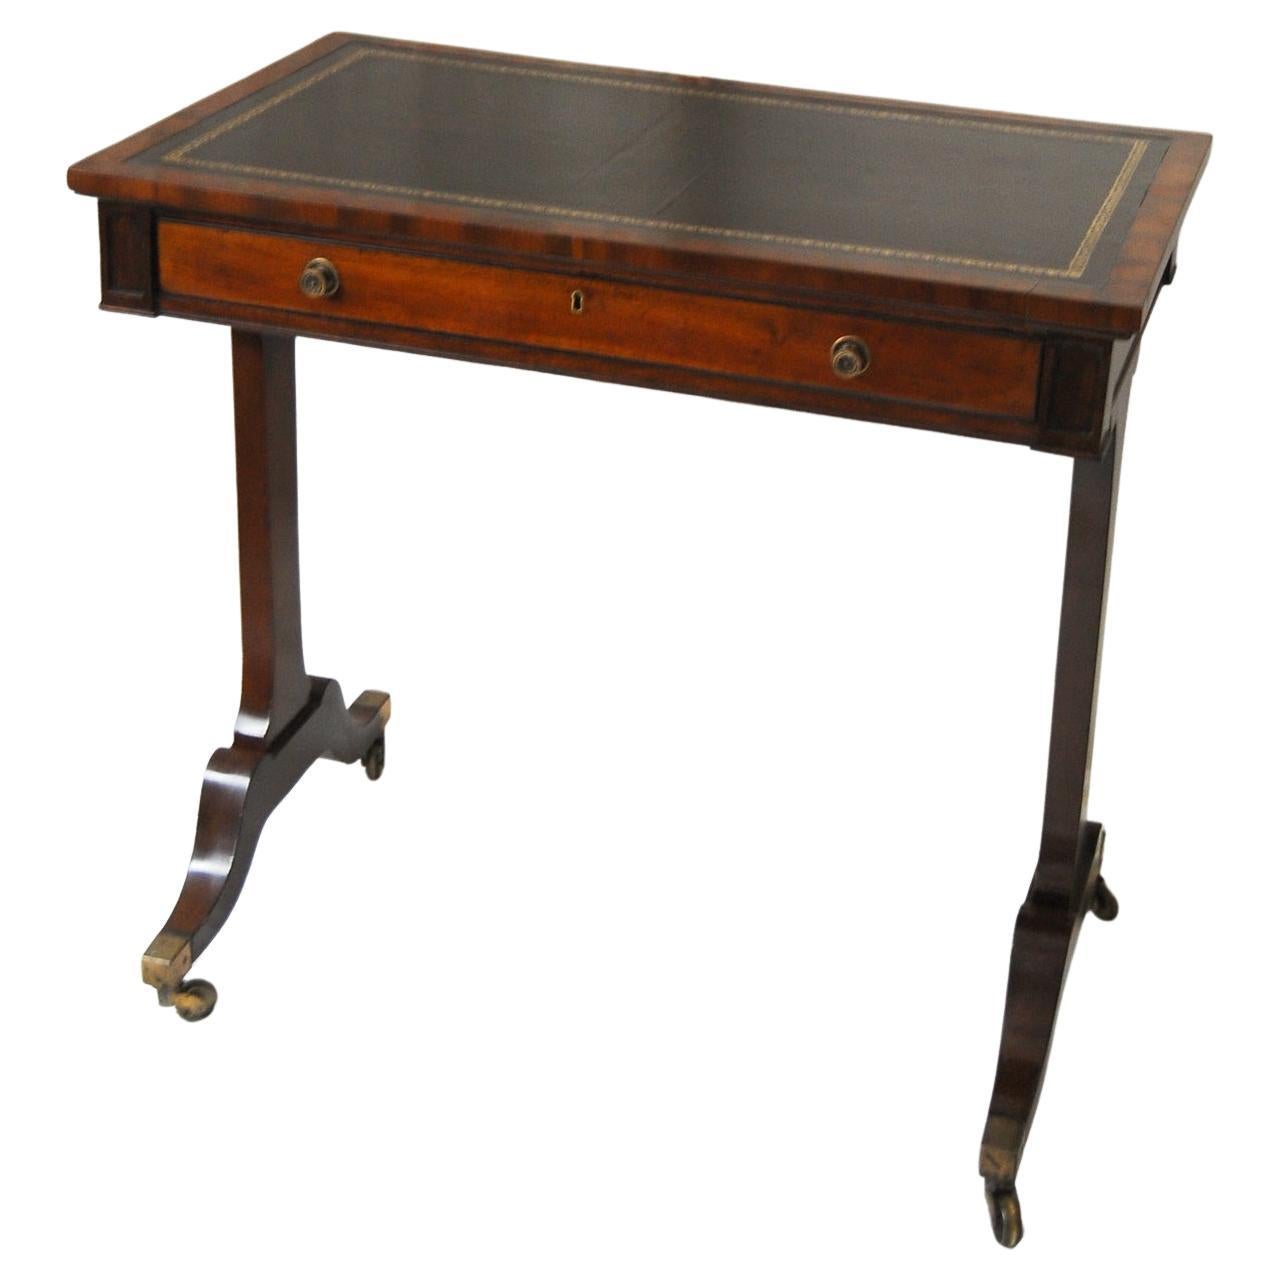 English Regency Period Mahogany Writing Table with Pedestal Ends 33 Inches Wide For Sale